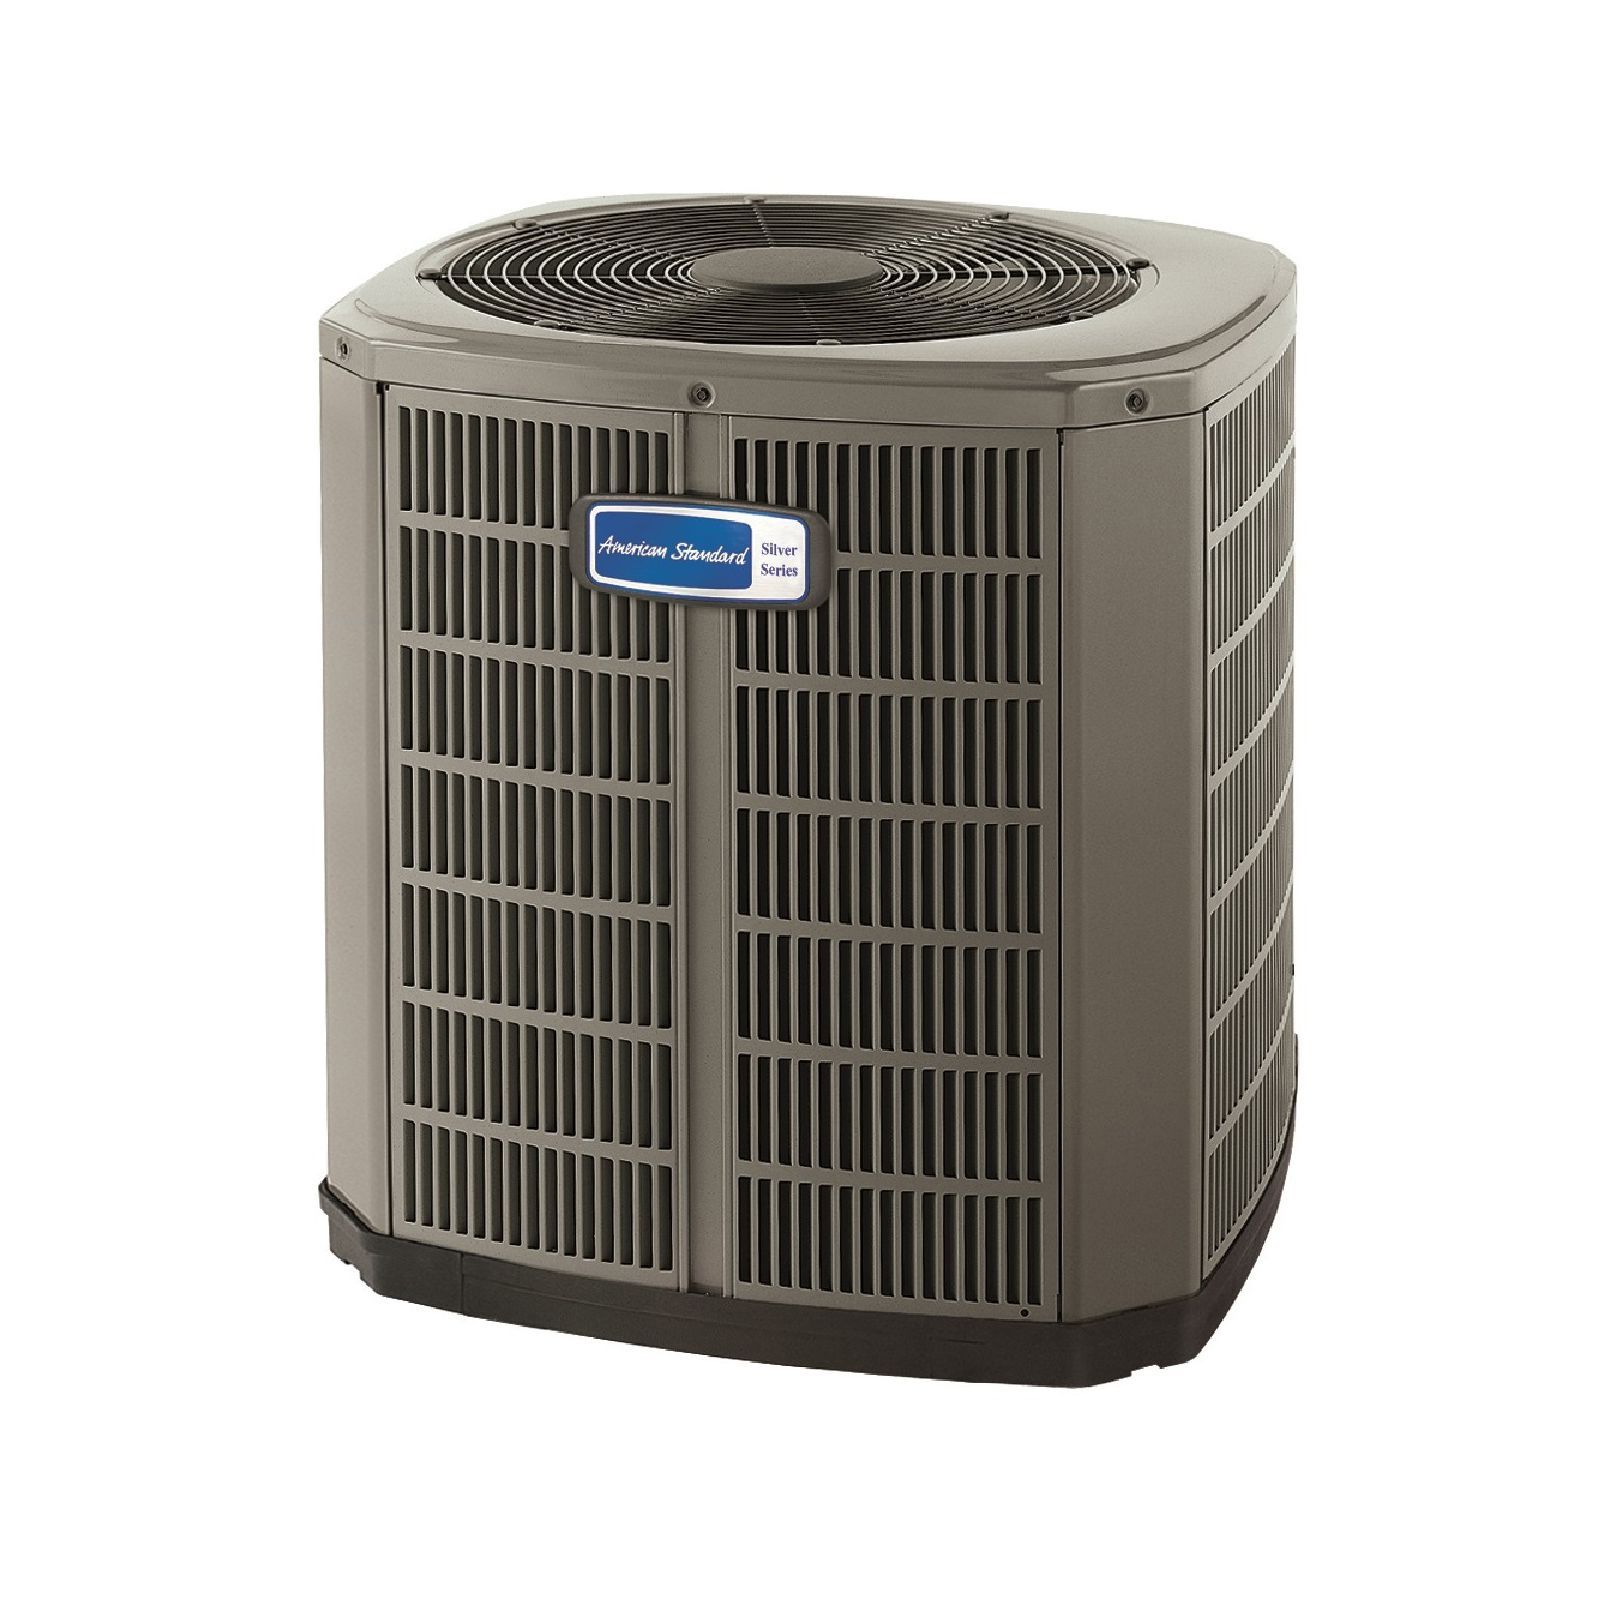 American Standard Heating & Cooling 3 Ton Air Conditioner 1874439